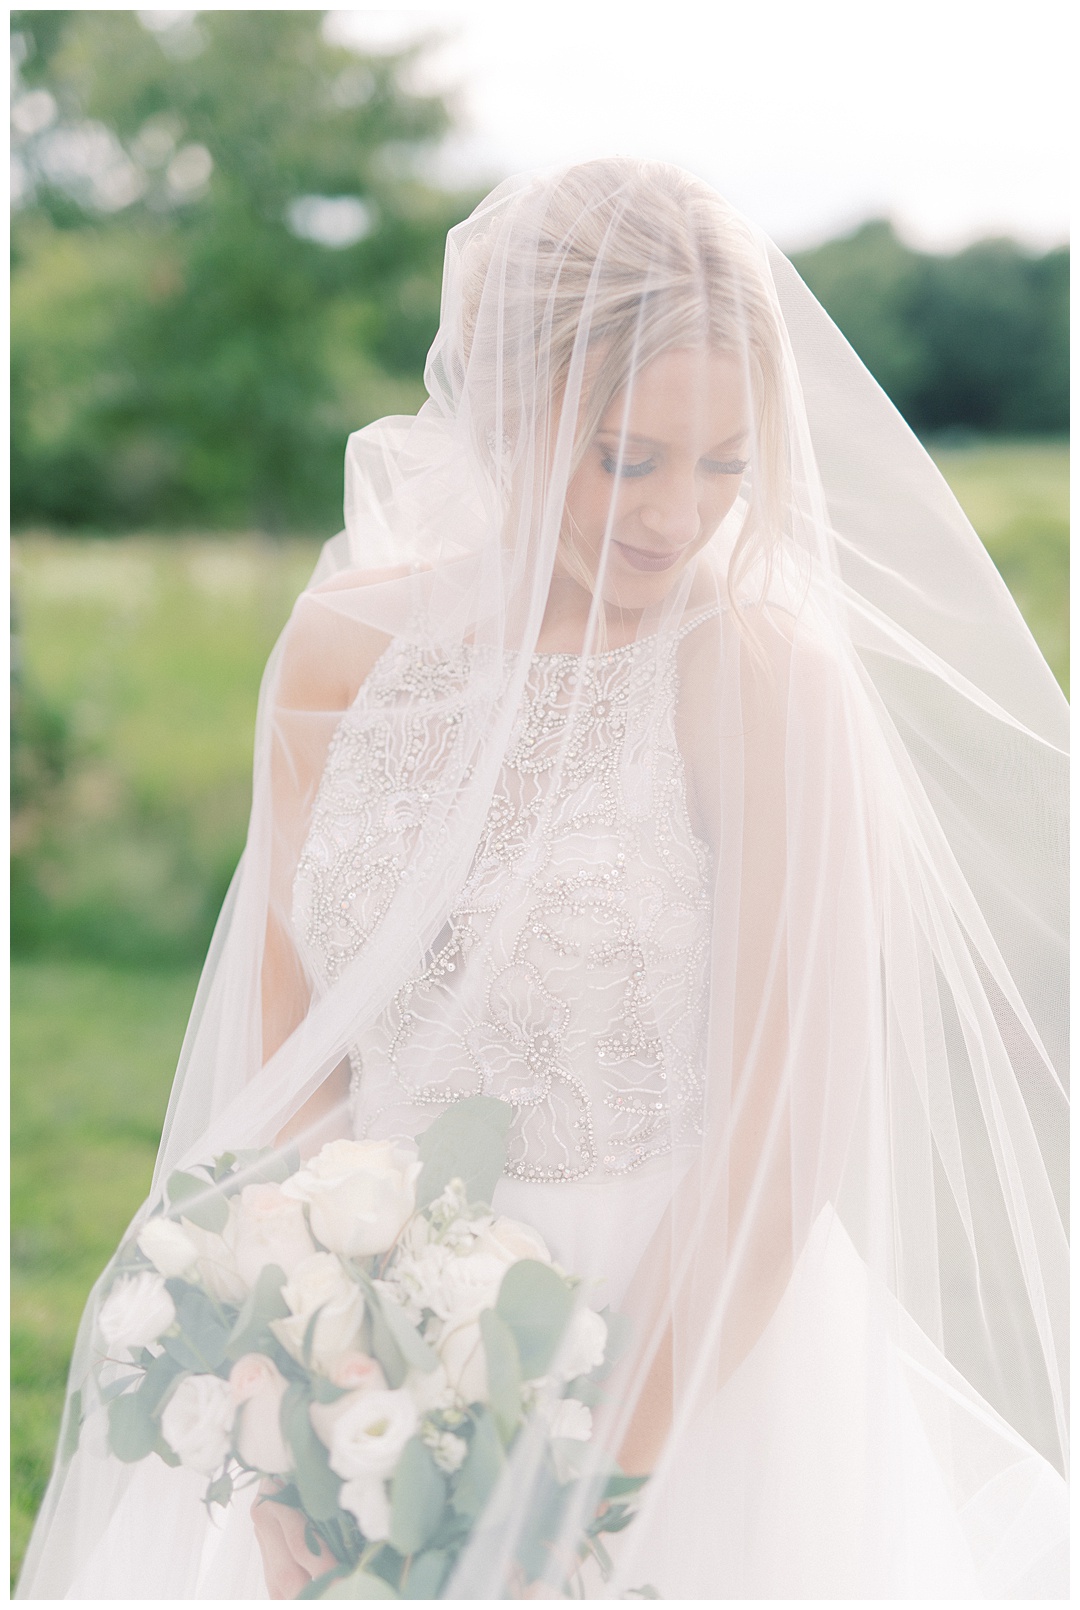 Bride with Veil Lush Backyard Wedding on Film Featured on Magnolia Rouge with Sarah Sunstrom Photography